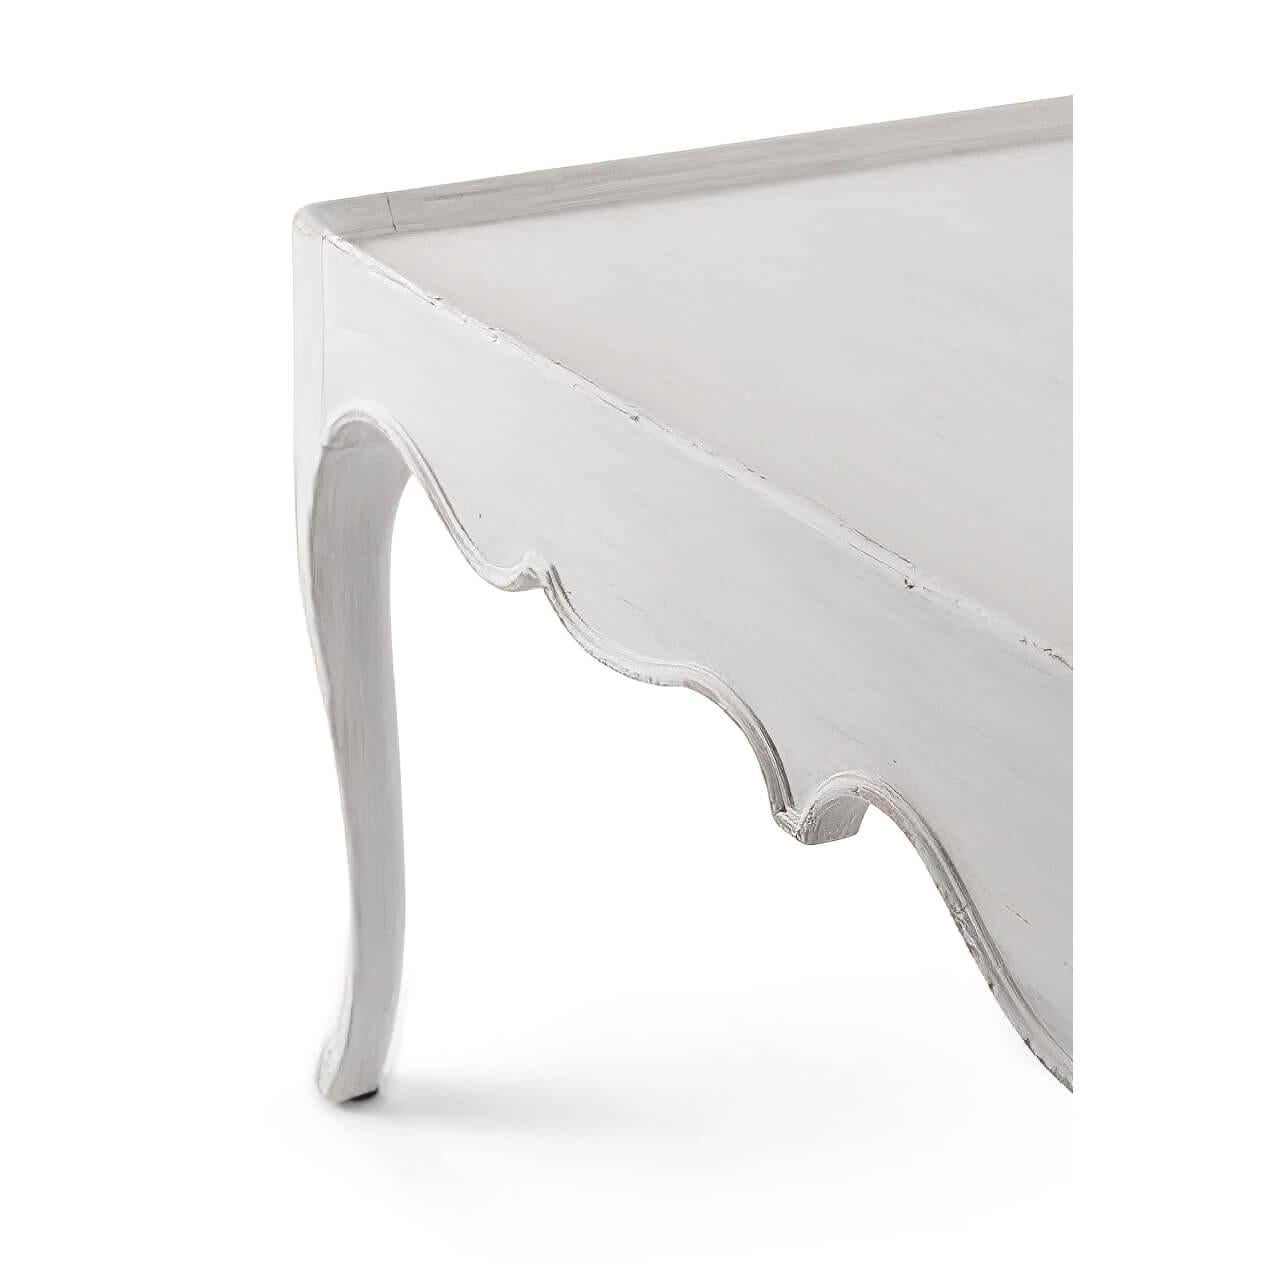 A French Provincial coffee table in a white painted finish, with a dish top, scalloped aprons and cabriole legs.

Dimensions: 52